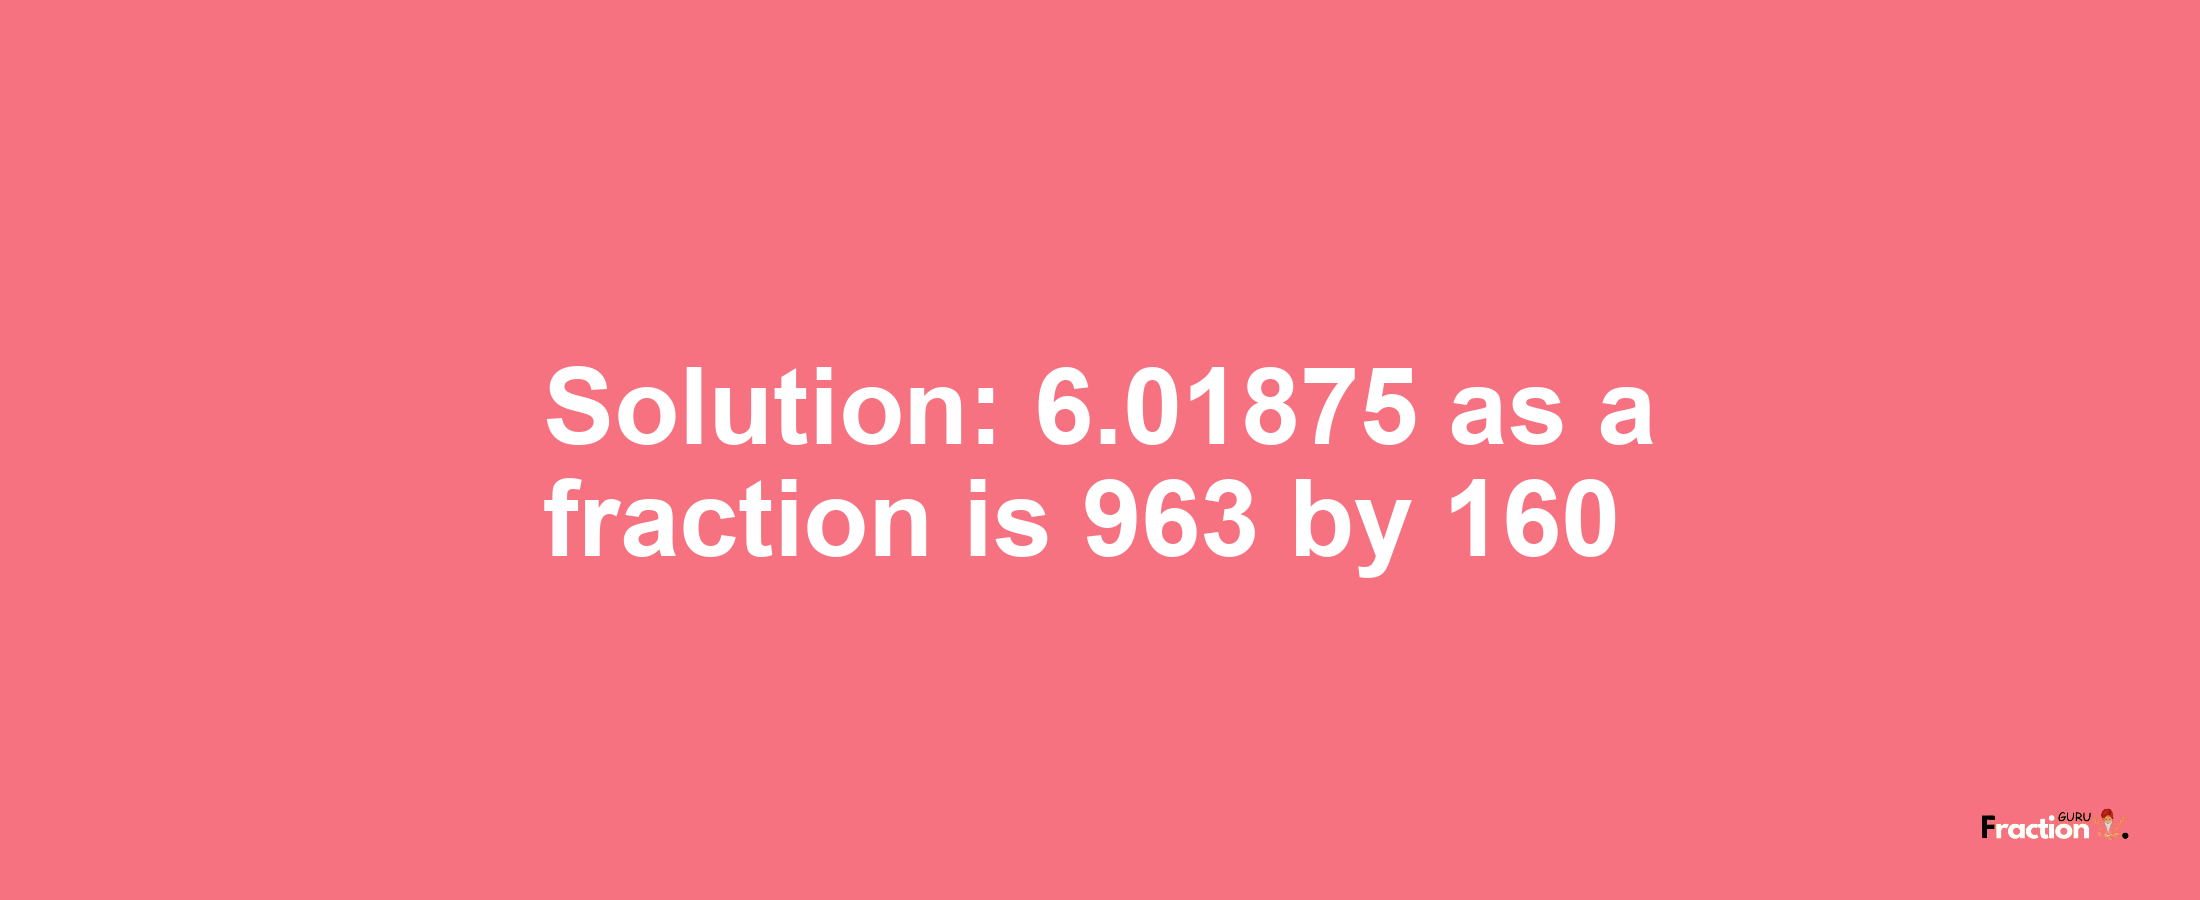 Solution:6.01875 as a fraction is 963/160